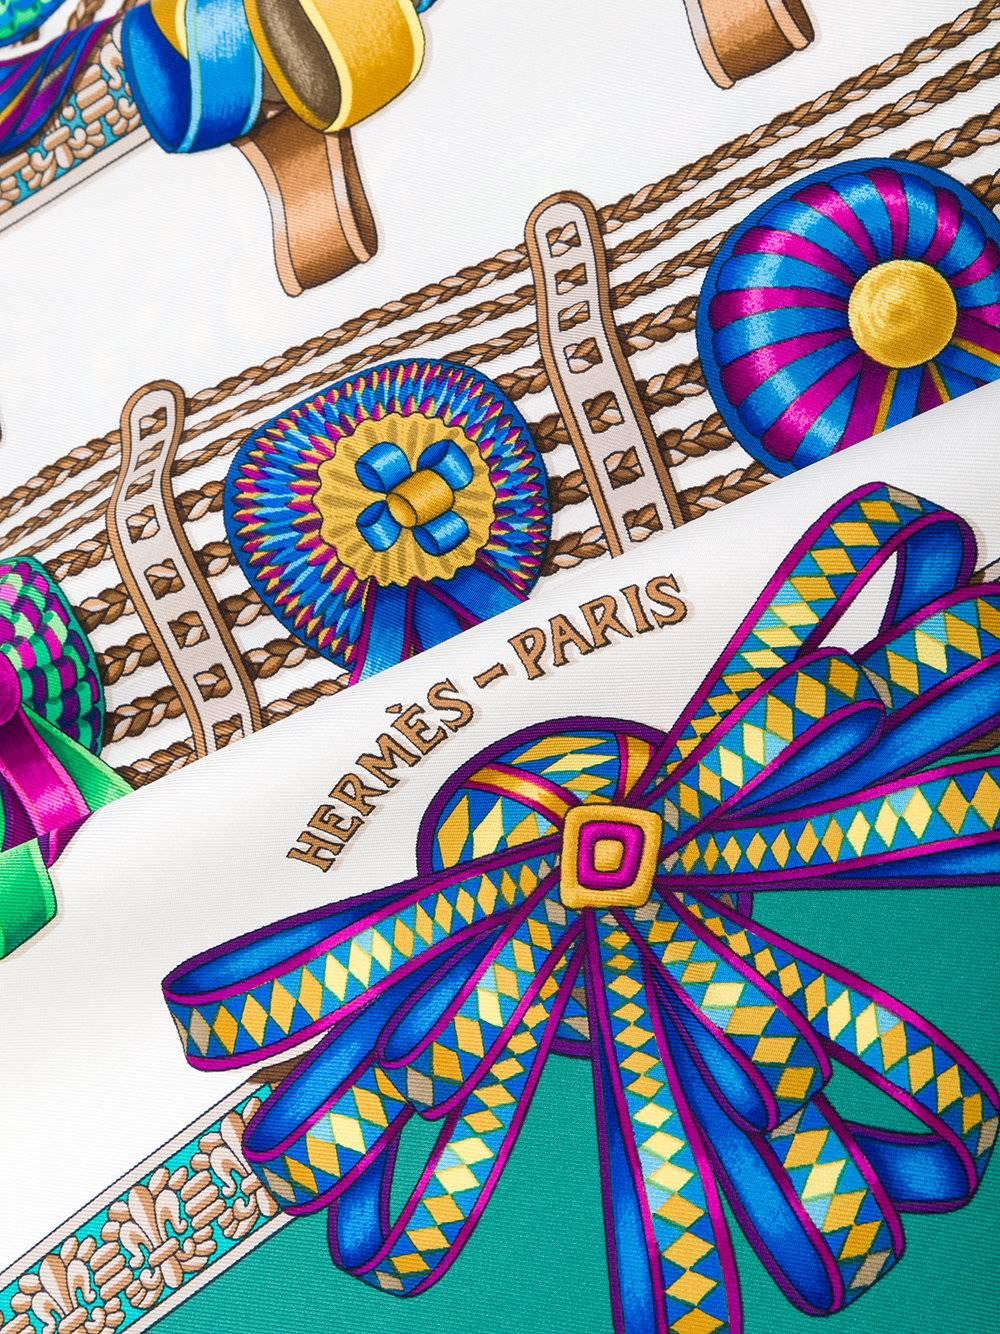 Hermes Les Rubans du Cheval Scarf in bold multicolours made from 100% Silk. Featuring patterns of bright bows, ribbon and classic Hermes motifs.

Colour: Multicolour

Material: 100% Silk
